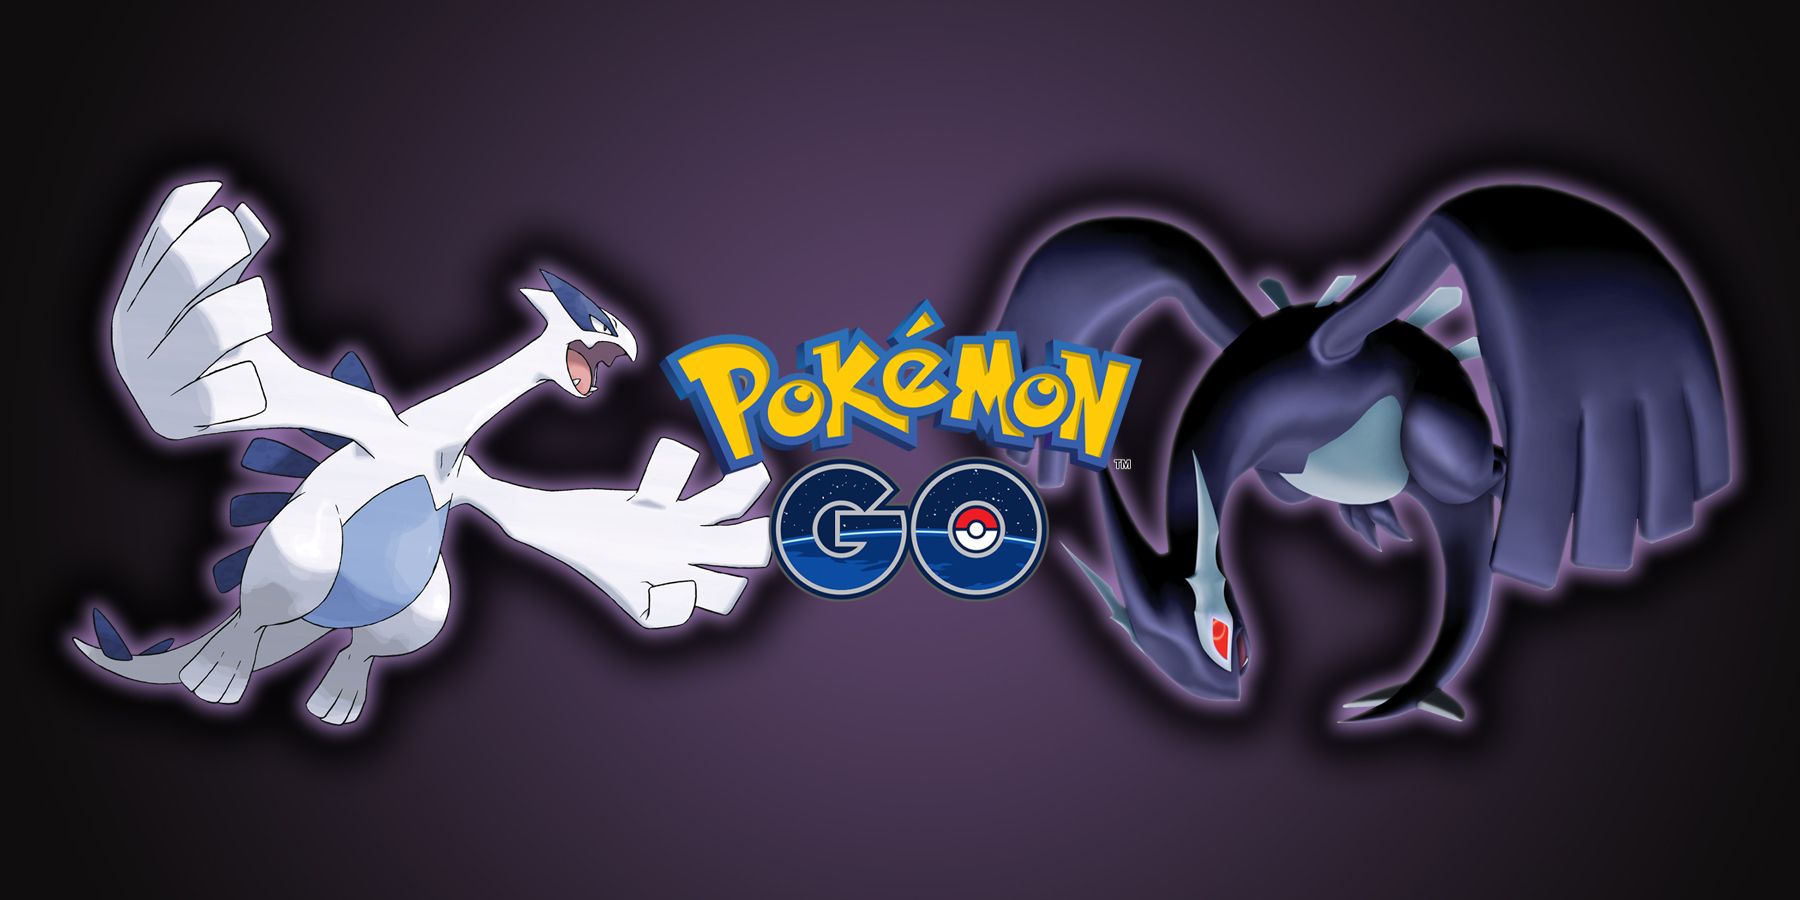 Lugia and Shadow Lugia from the Pokemon franchise with the Pokemon GO logo between them.